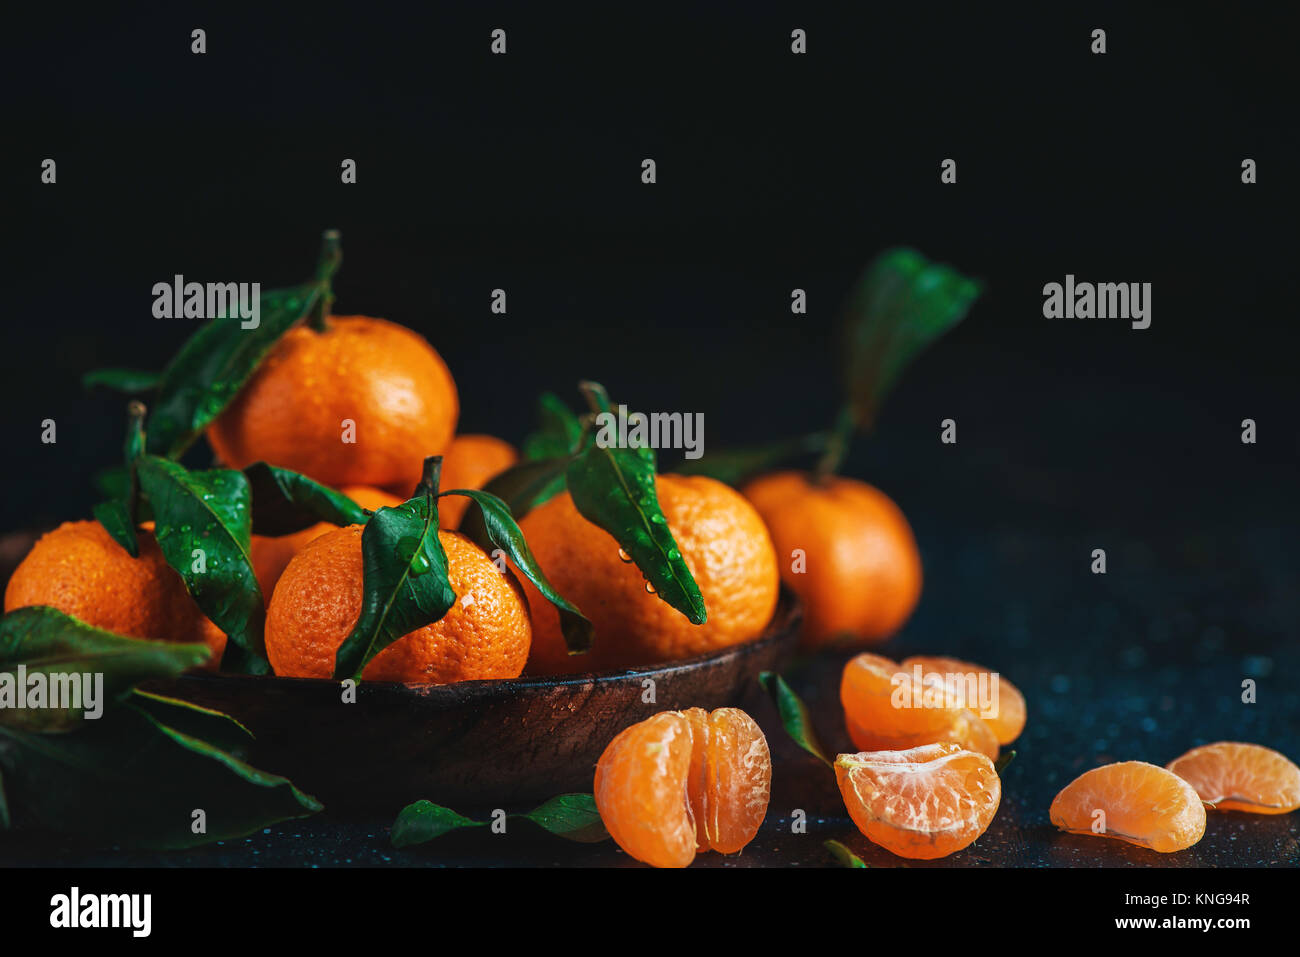 Citrus fruits on a wooden plate with green leaves. Vibrant tangerines on a dark background. Rustic food photography. Stock Photo